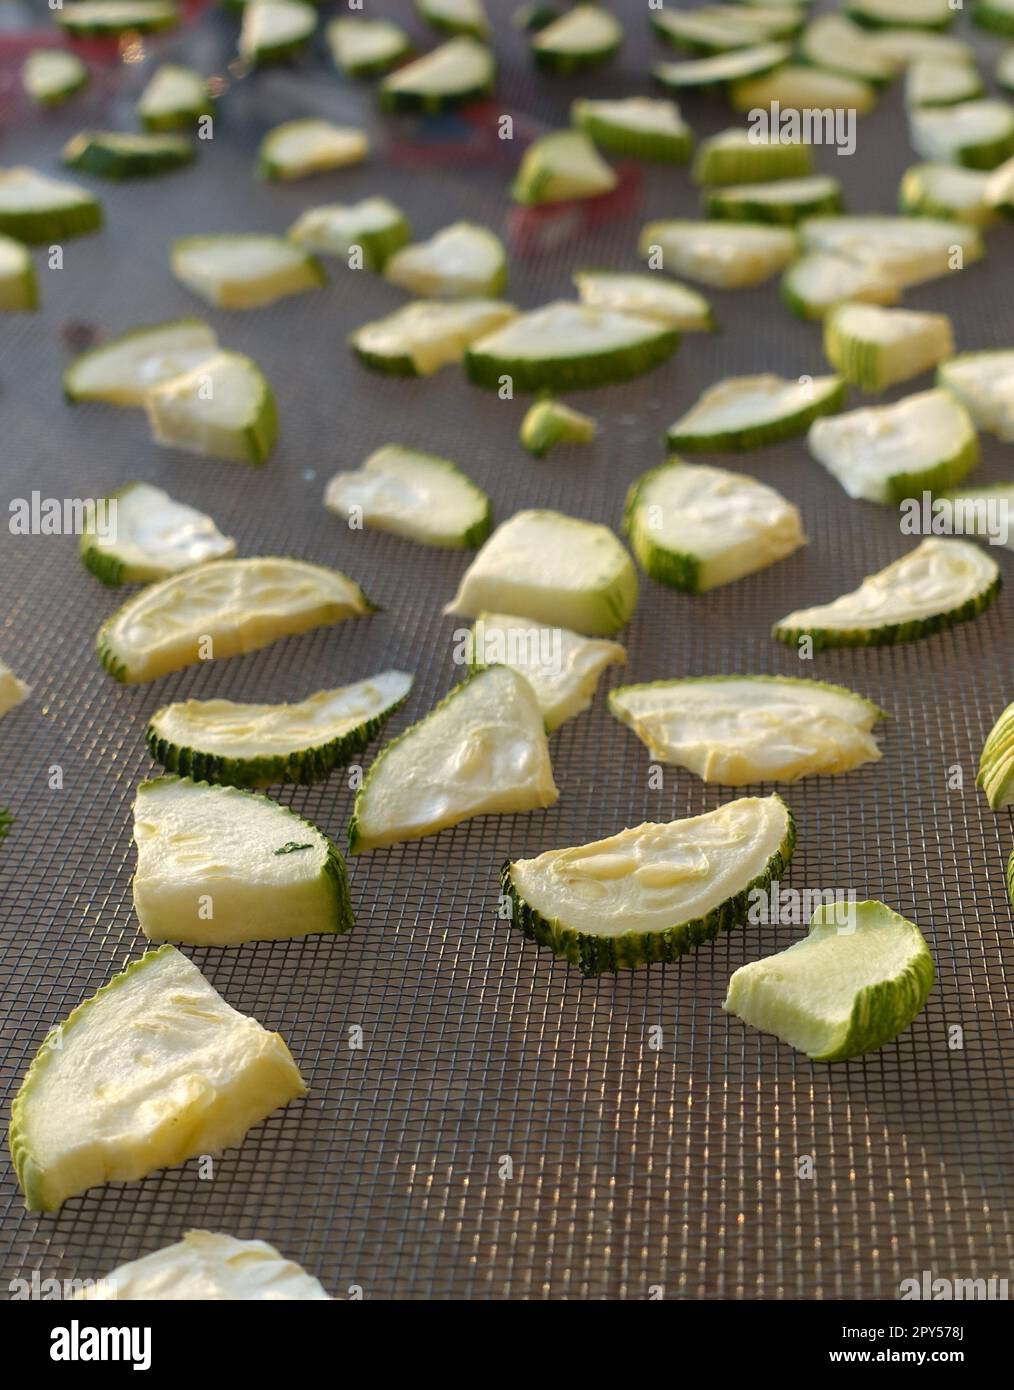 drying zucchini, drying vegetables in the sun, dried zucchini, drying sliced zucchini Stock Photo